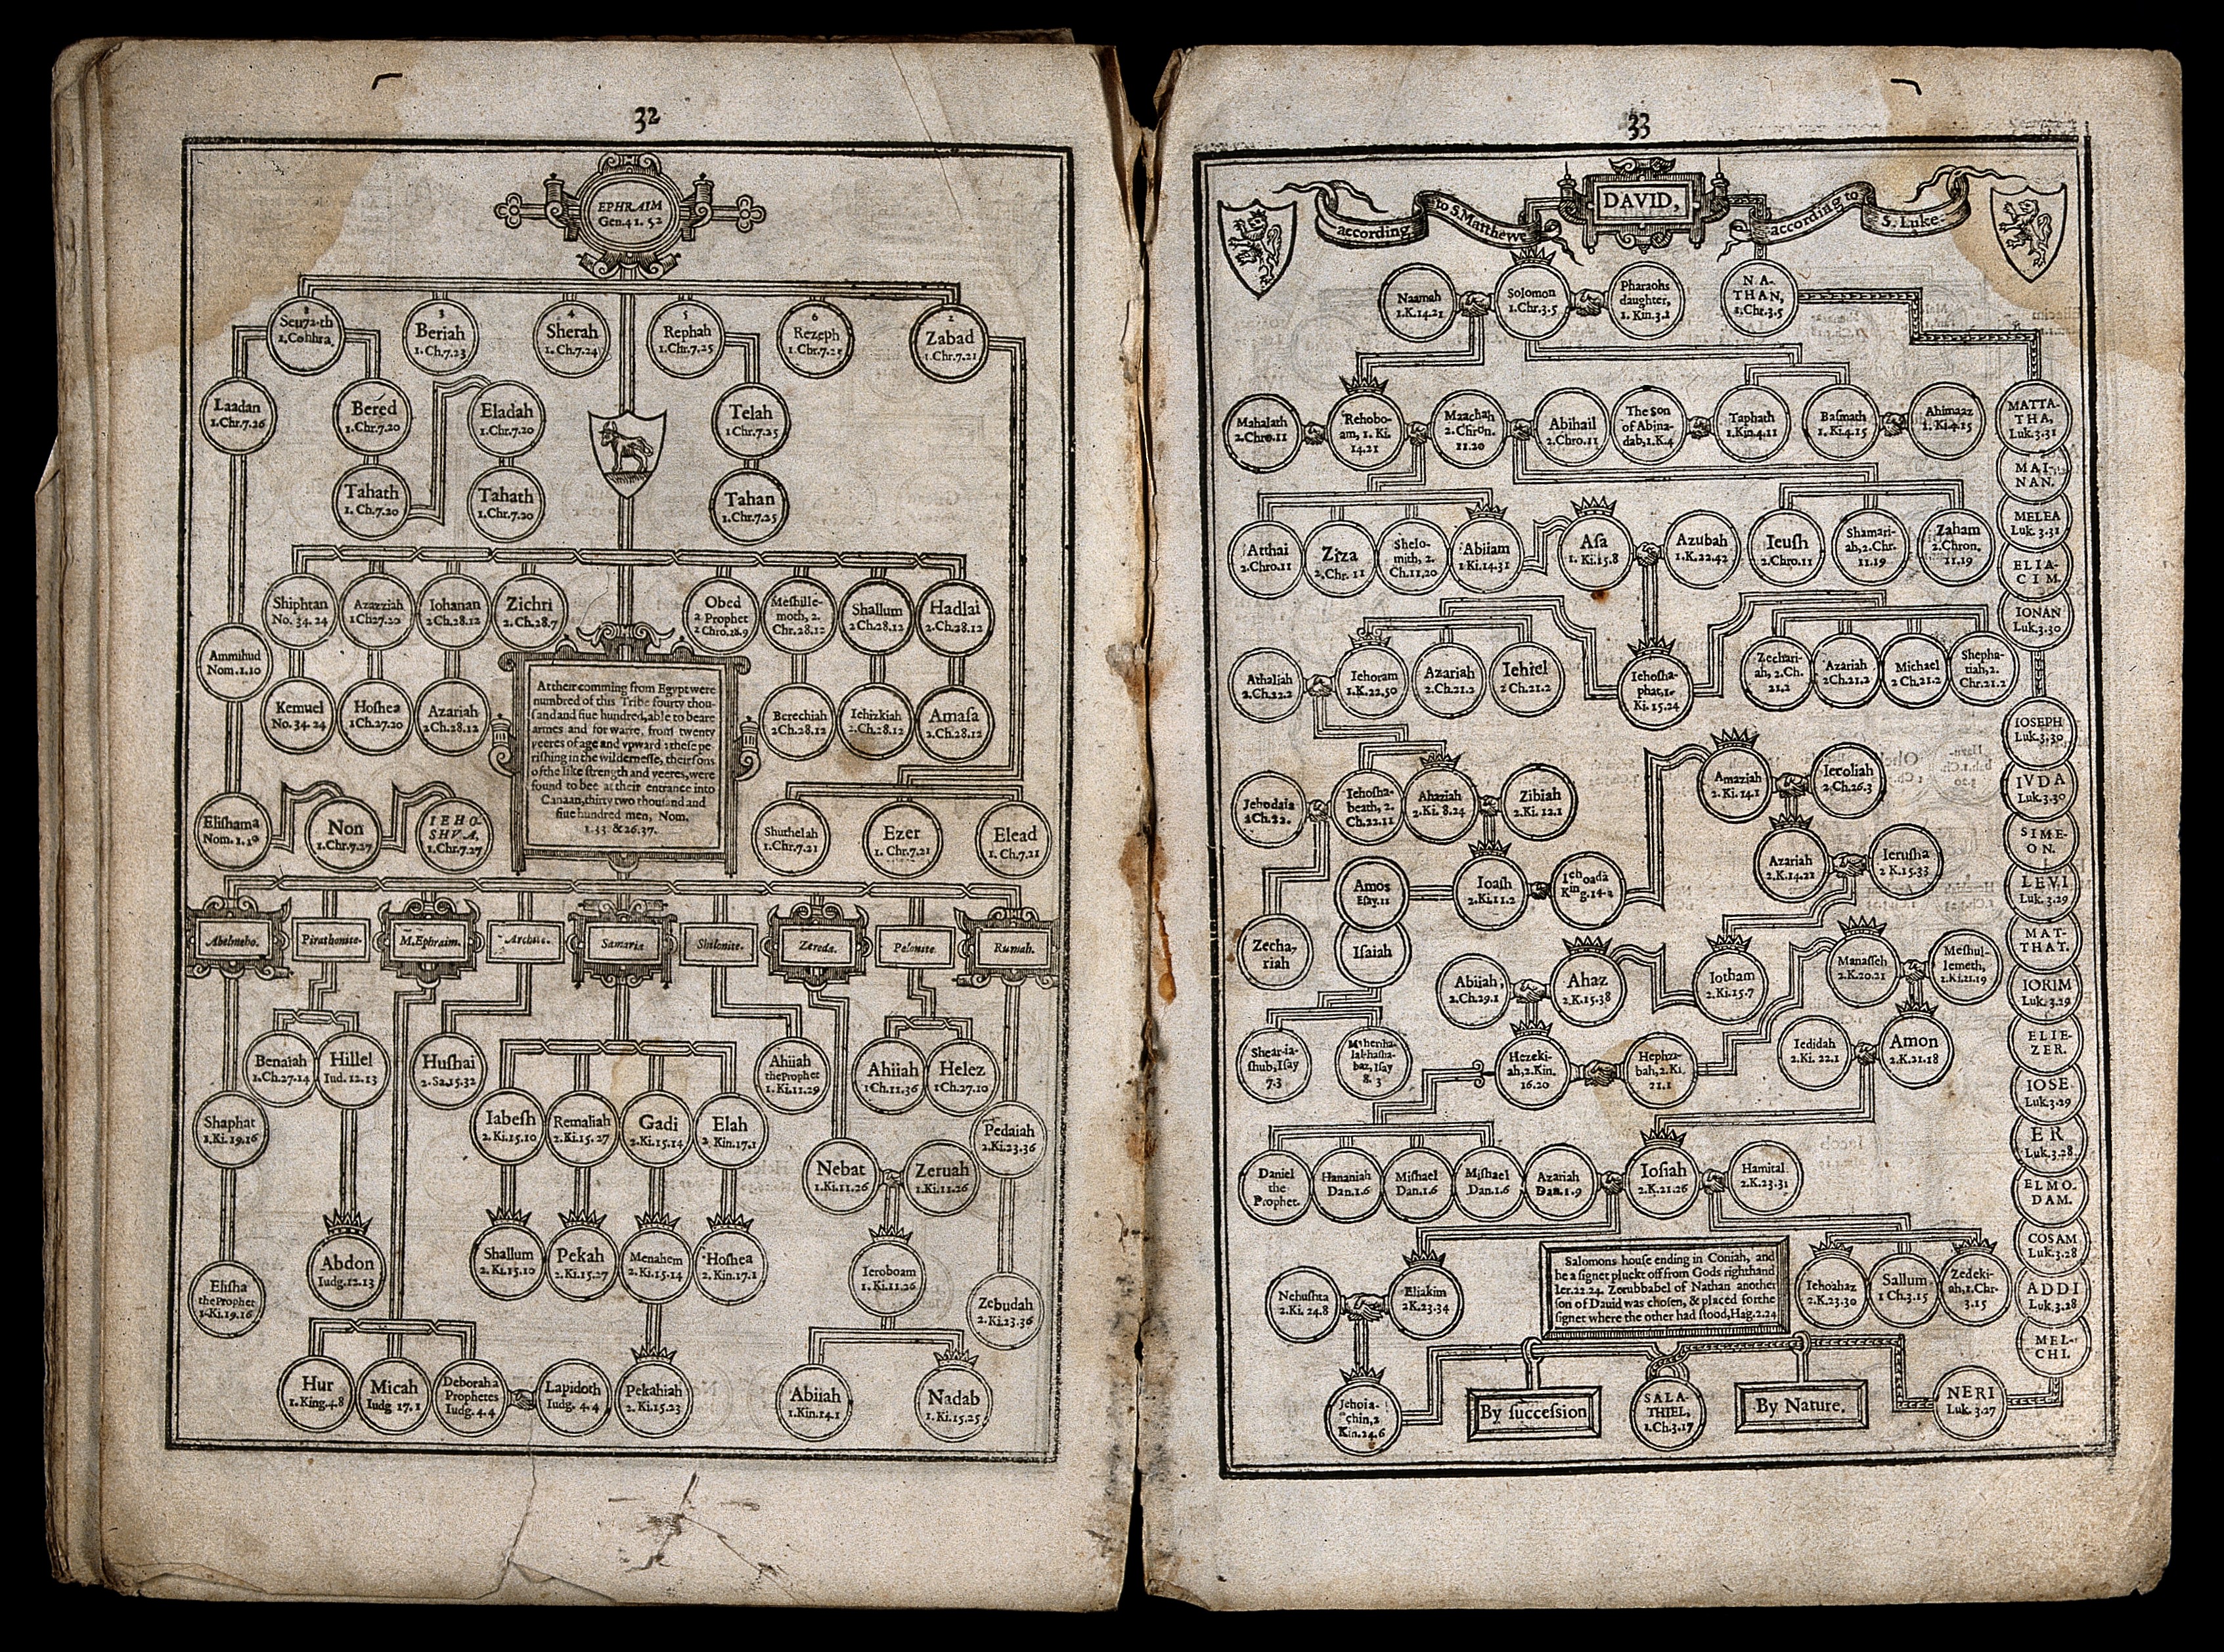 Genealogical tables of Ephraim and David. Etching, c. 1700. Wellcome V0034358